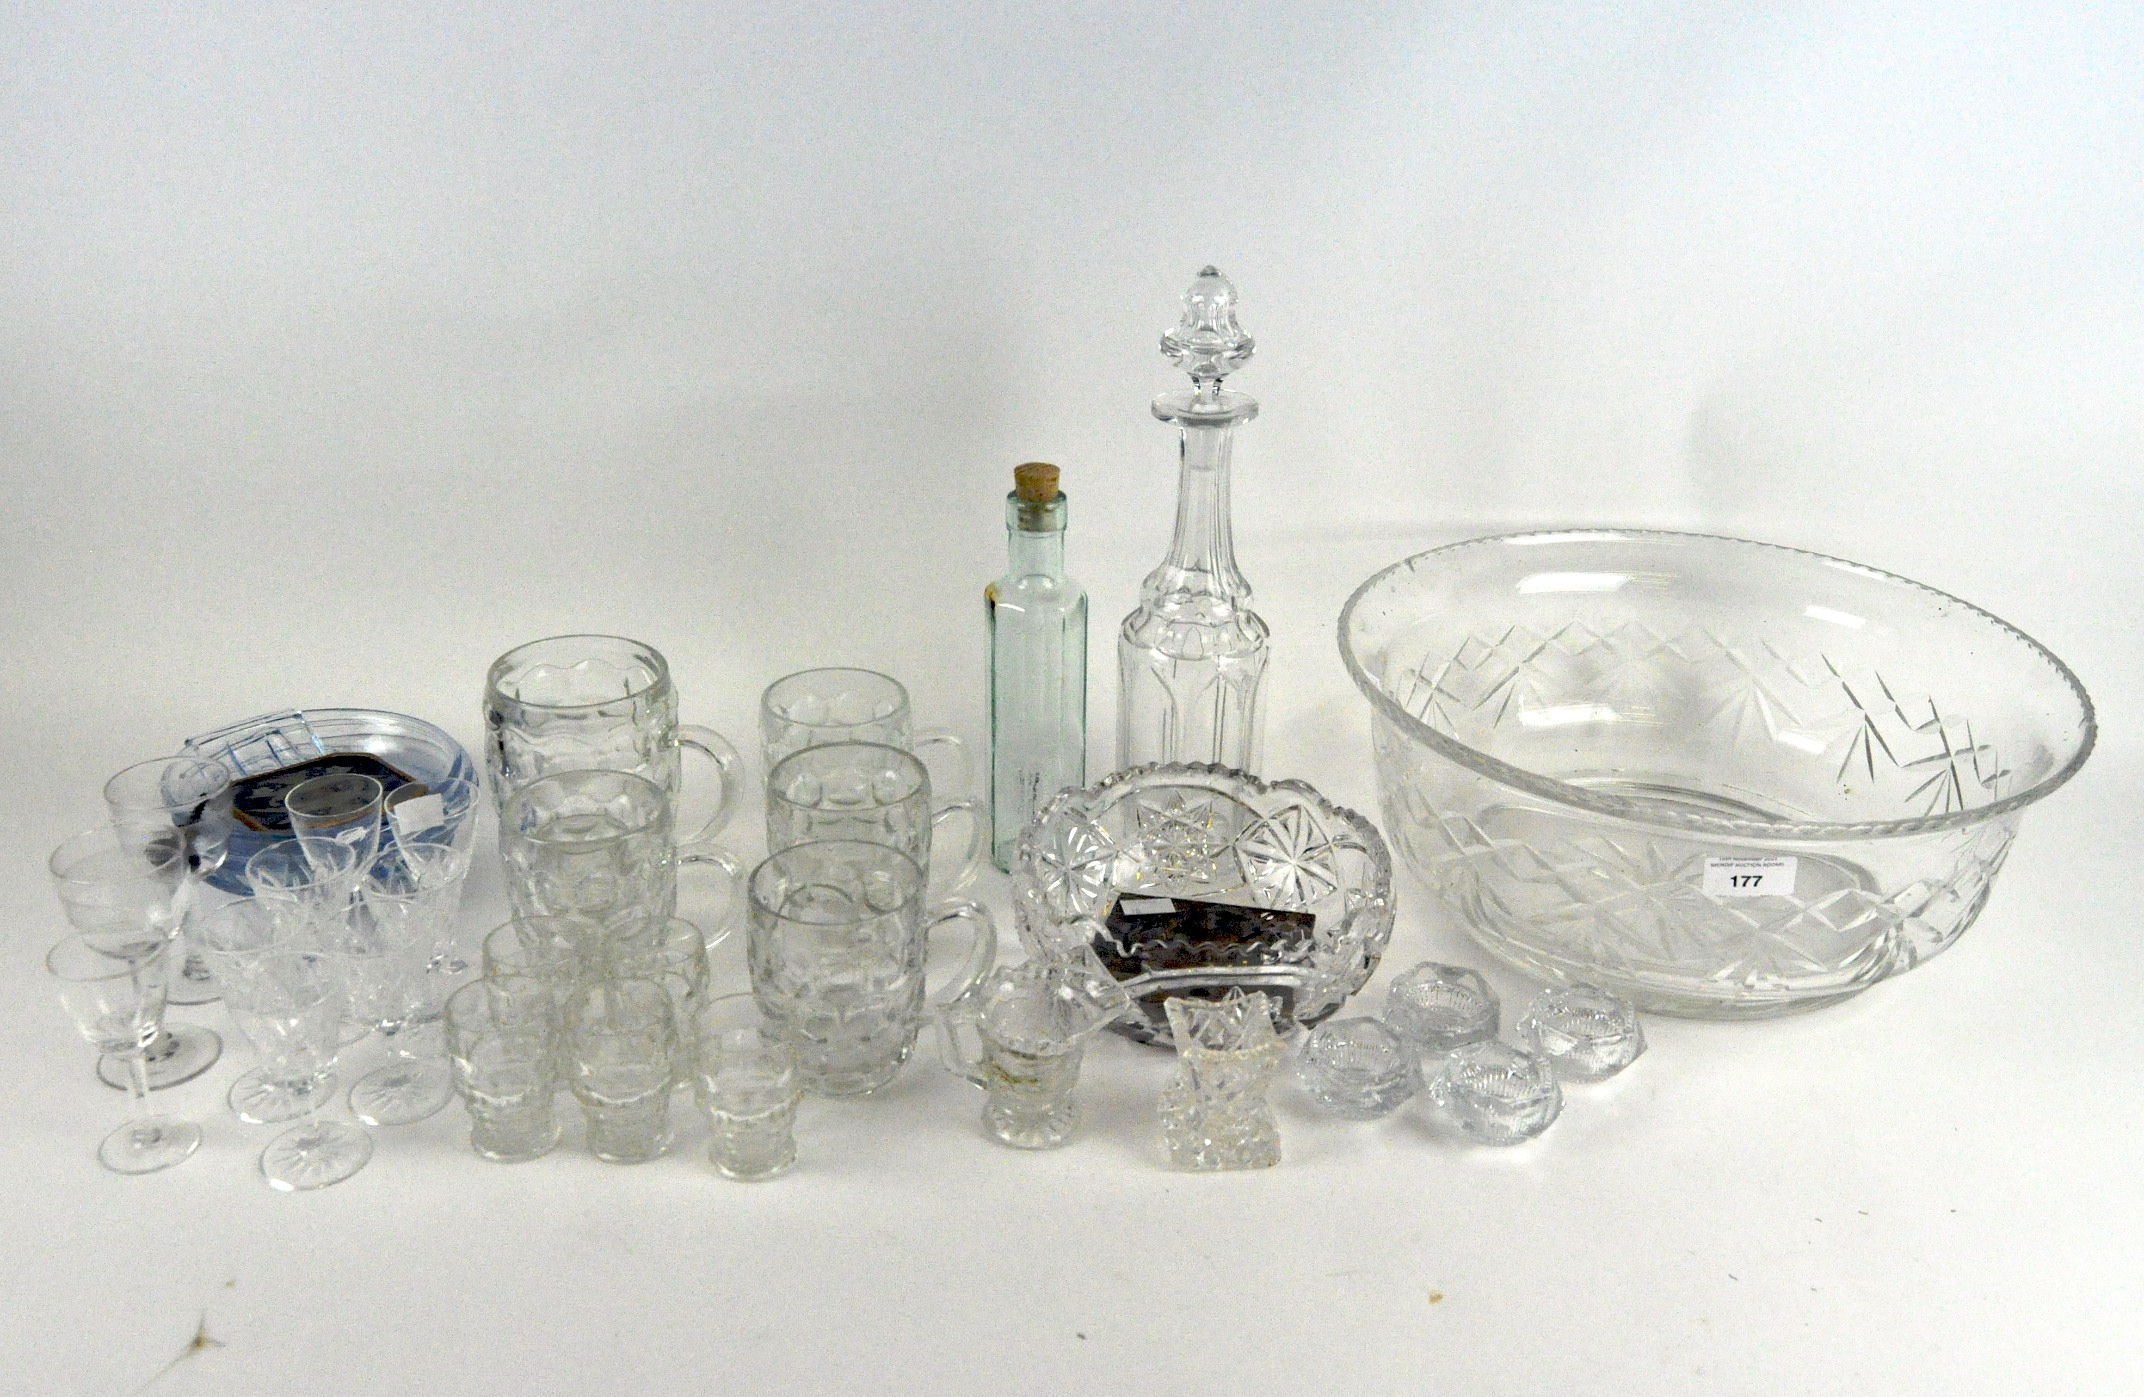 A large cut glass bowl, and other items